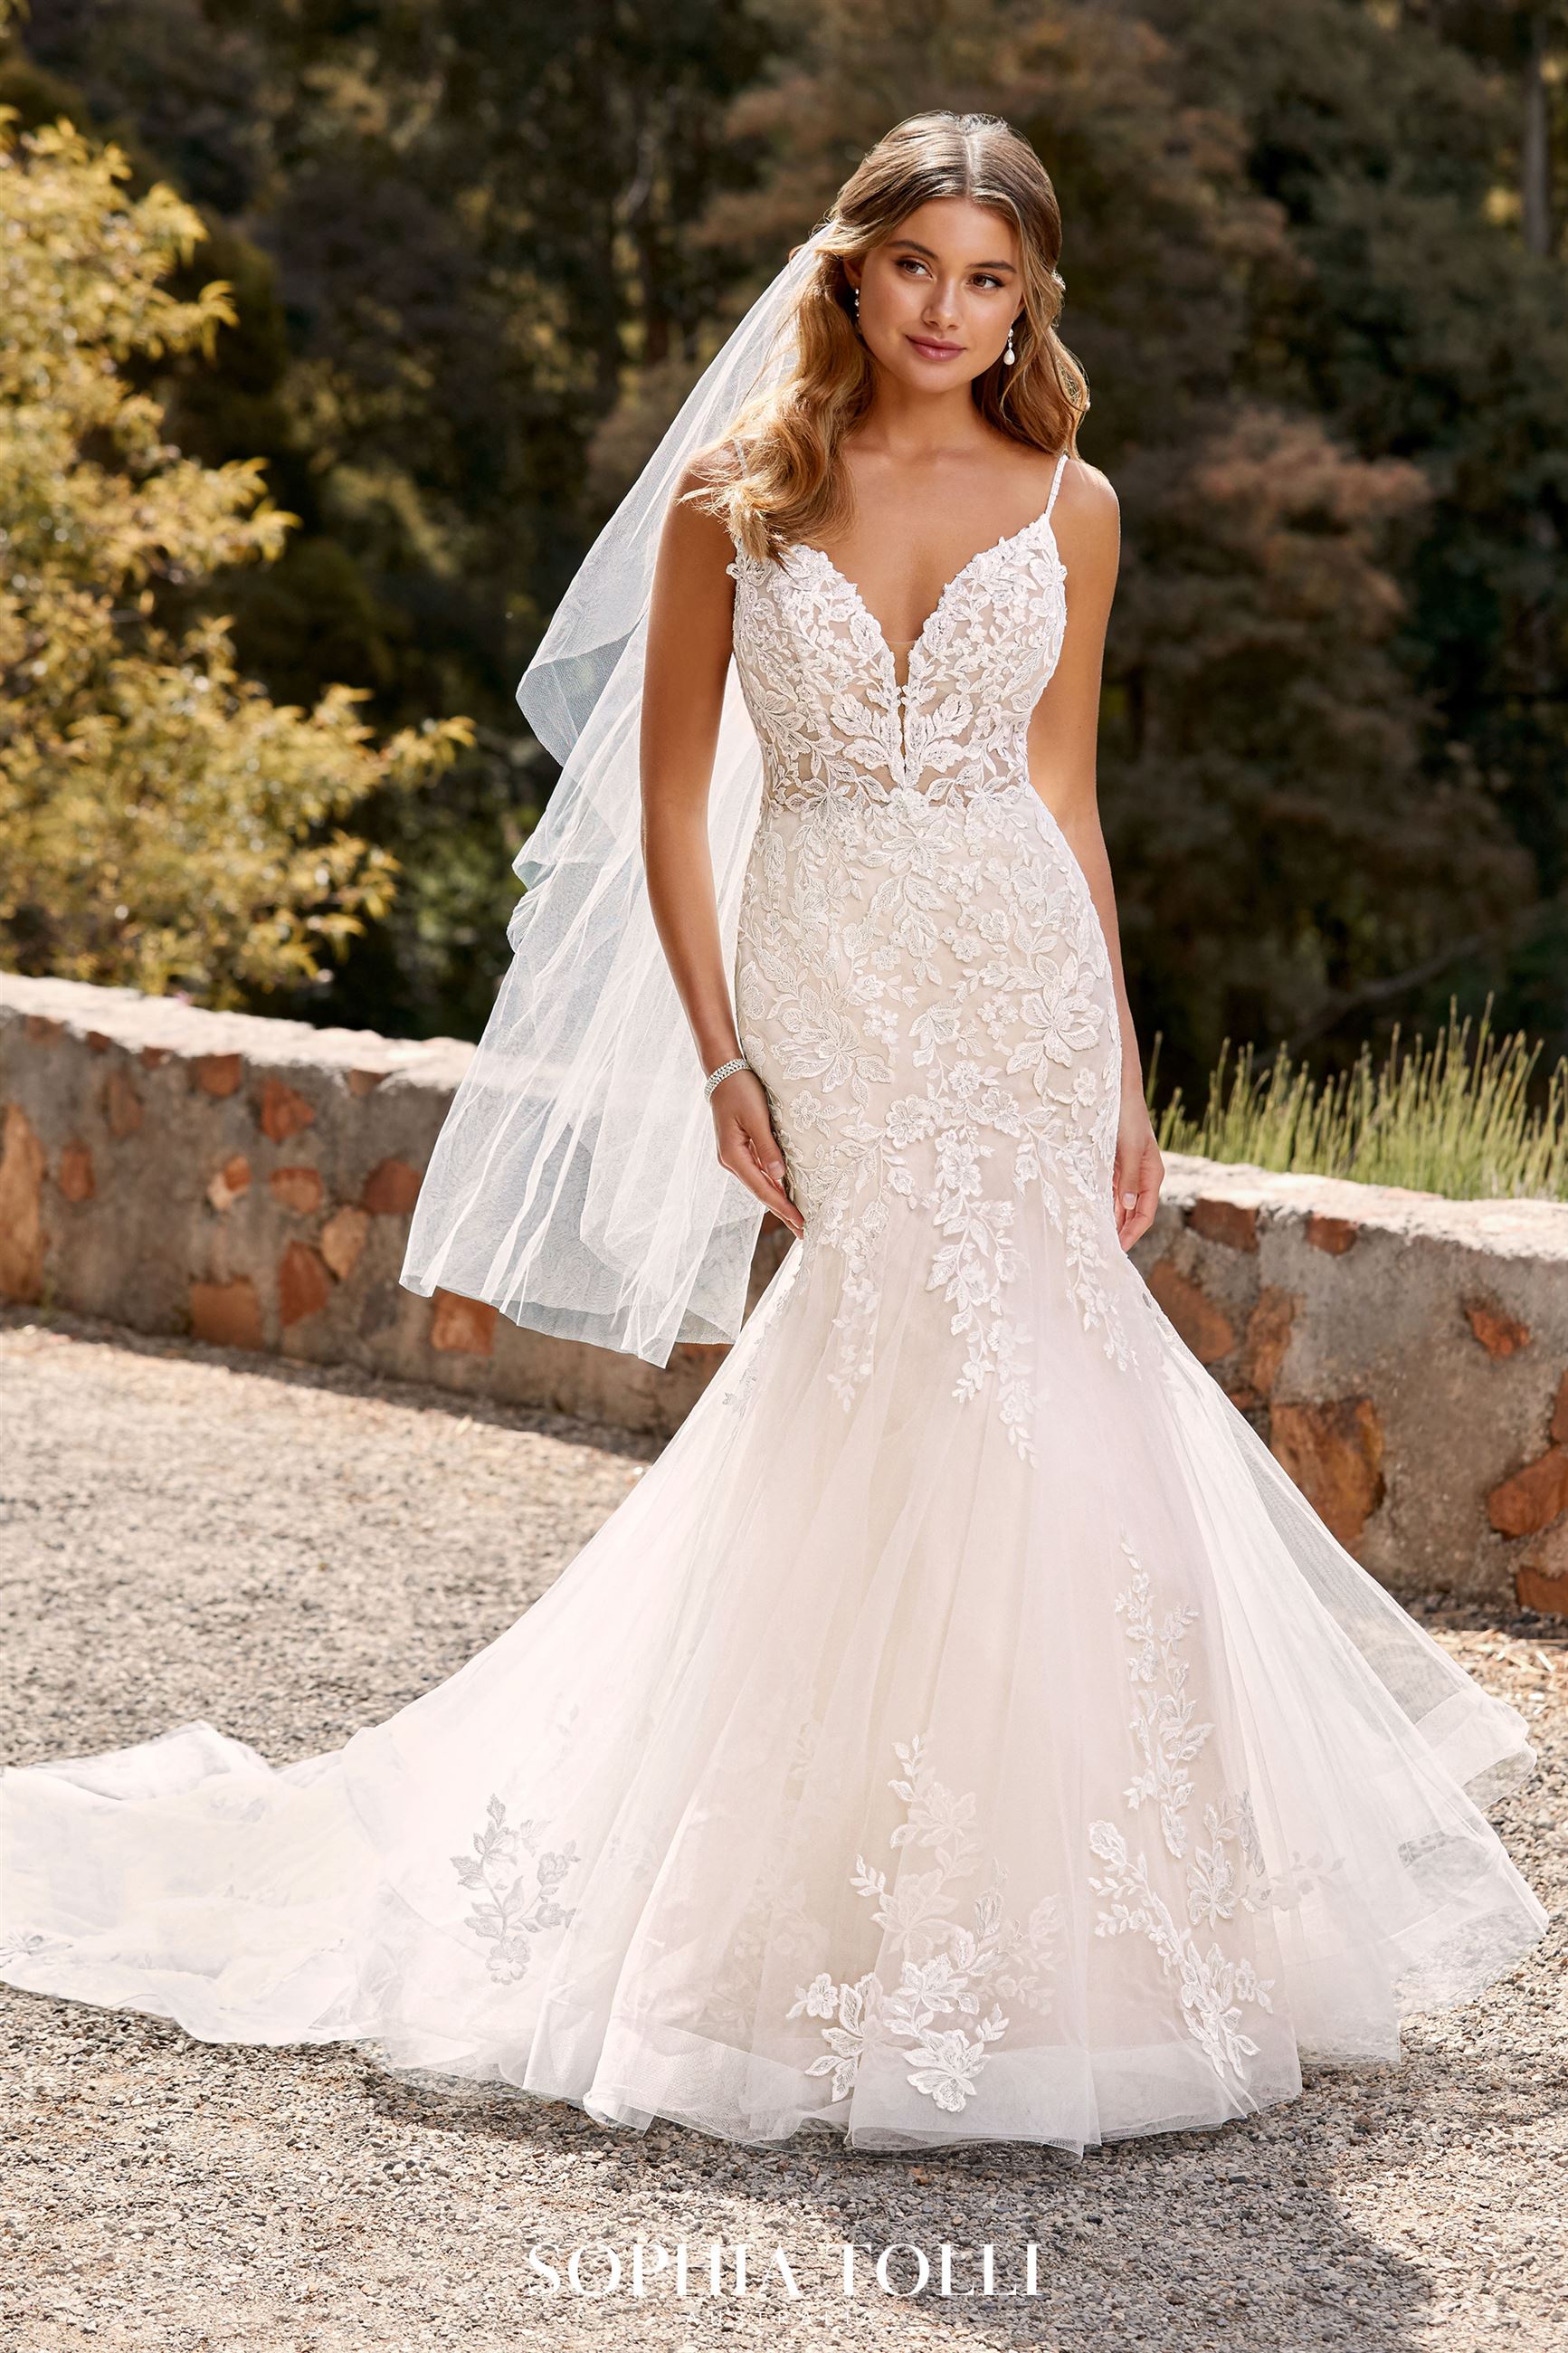 Stunning Mermaid Gown with Floral Details Skylar